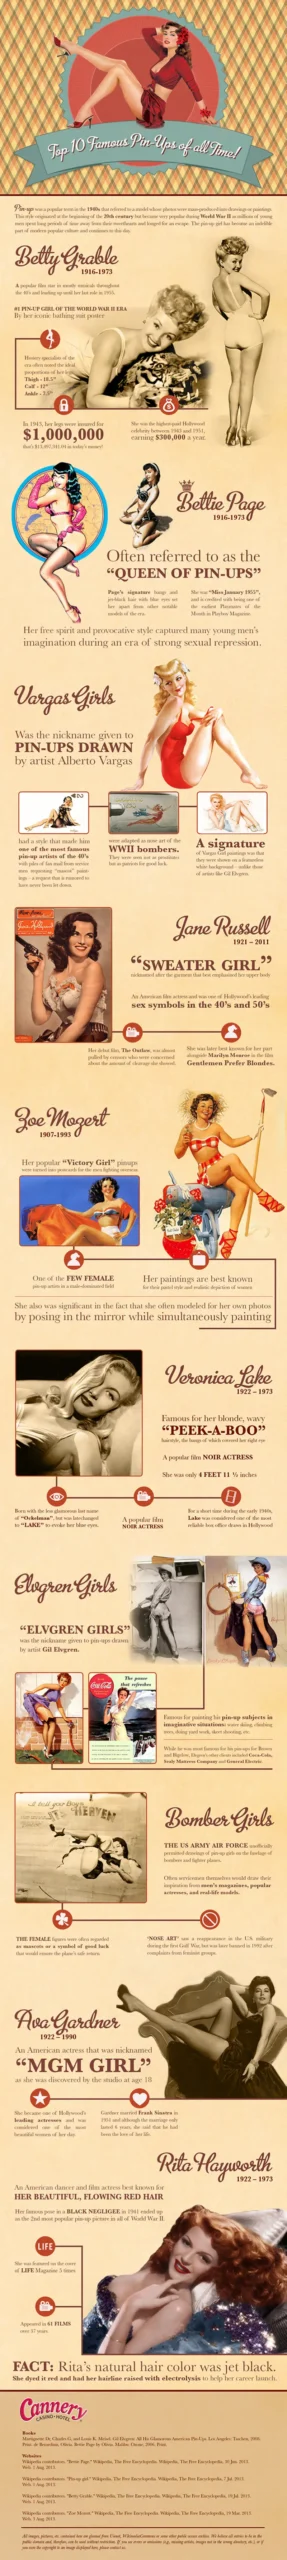 Top 10 Famous Pin-Ups Of All Time! [InfoGraphic]
